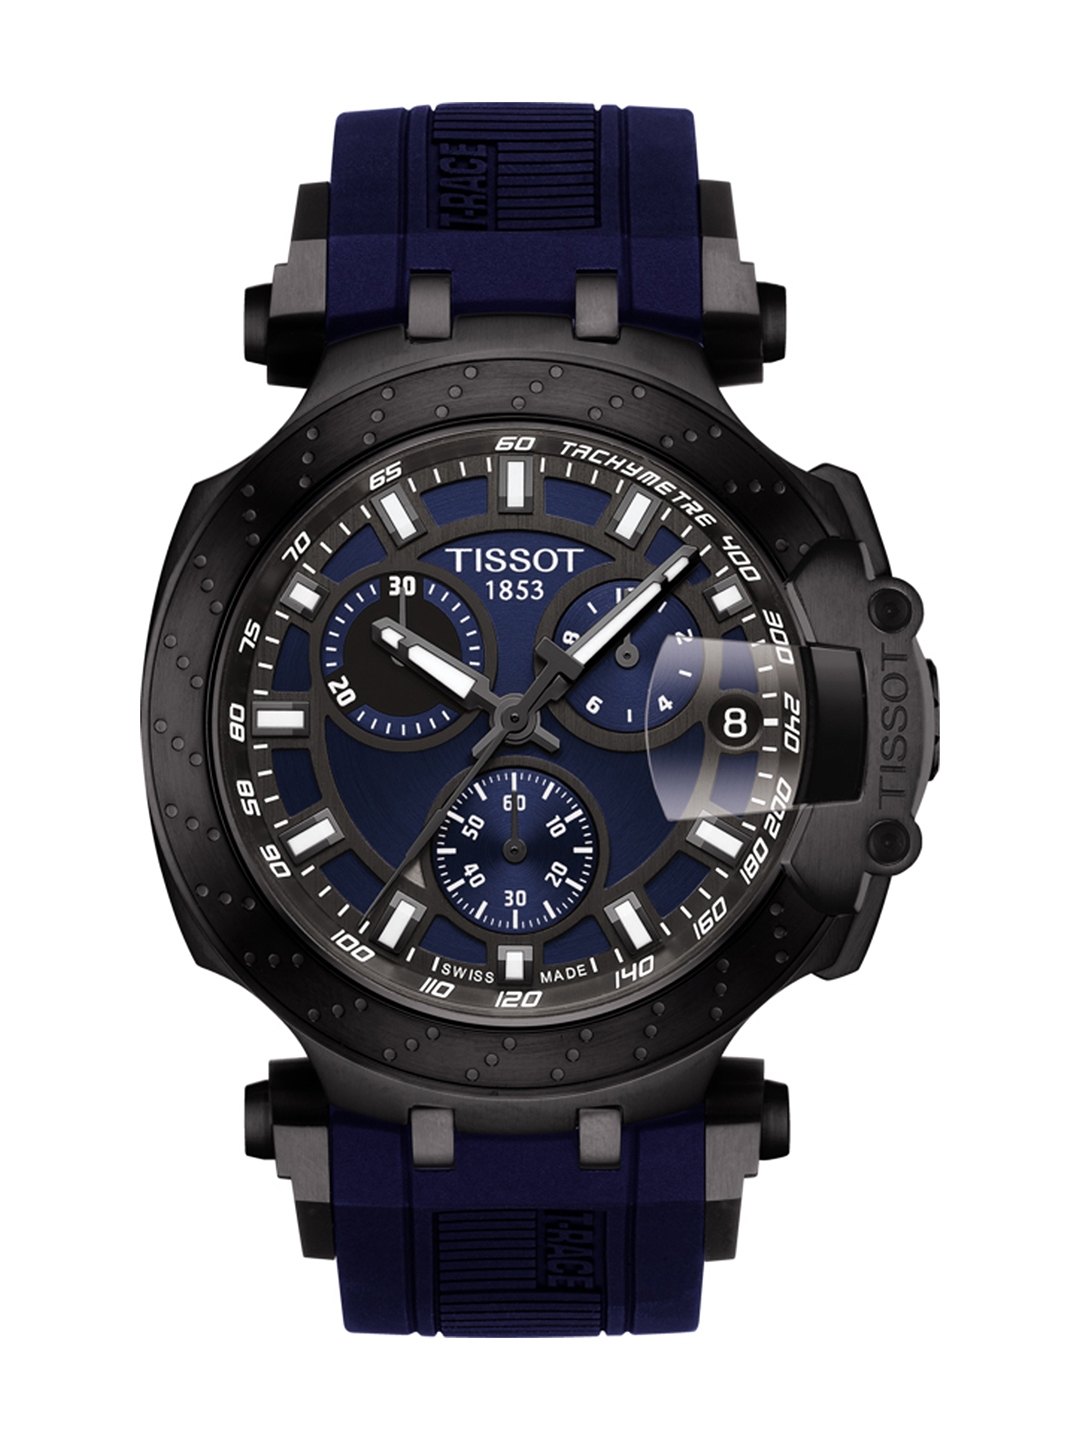 Buy Tissot Men Navy Blue T Race Swiss Chronograph Analogue Watch T1154173704100 Watches For